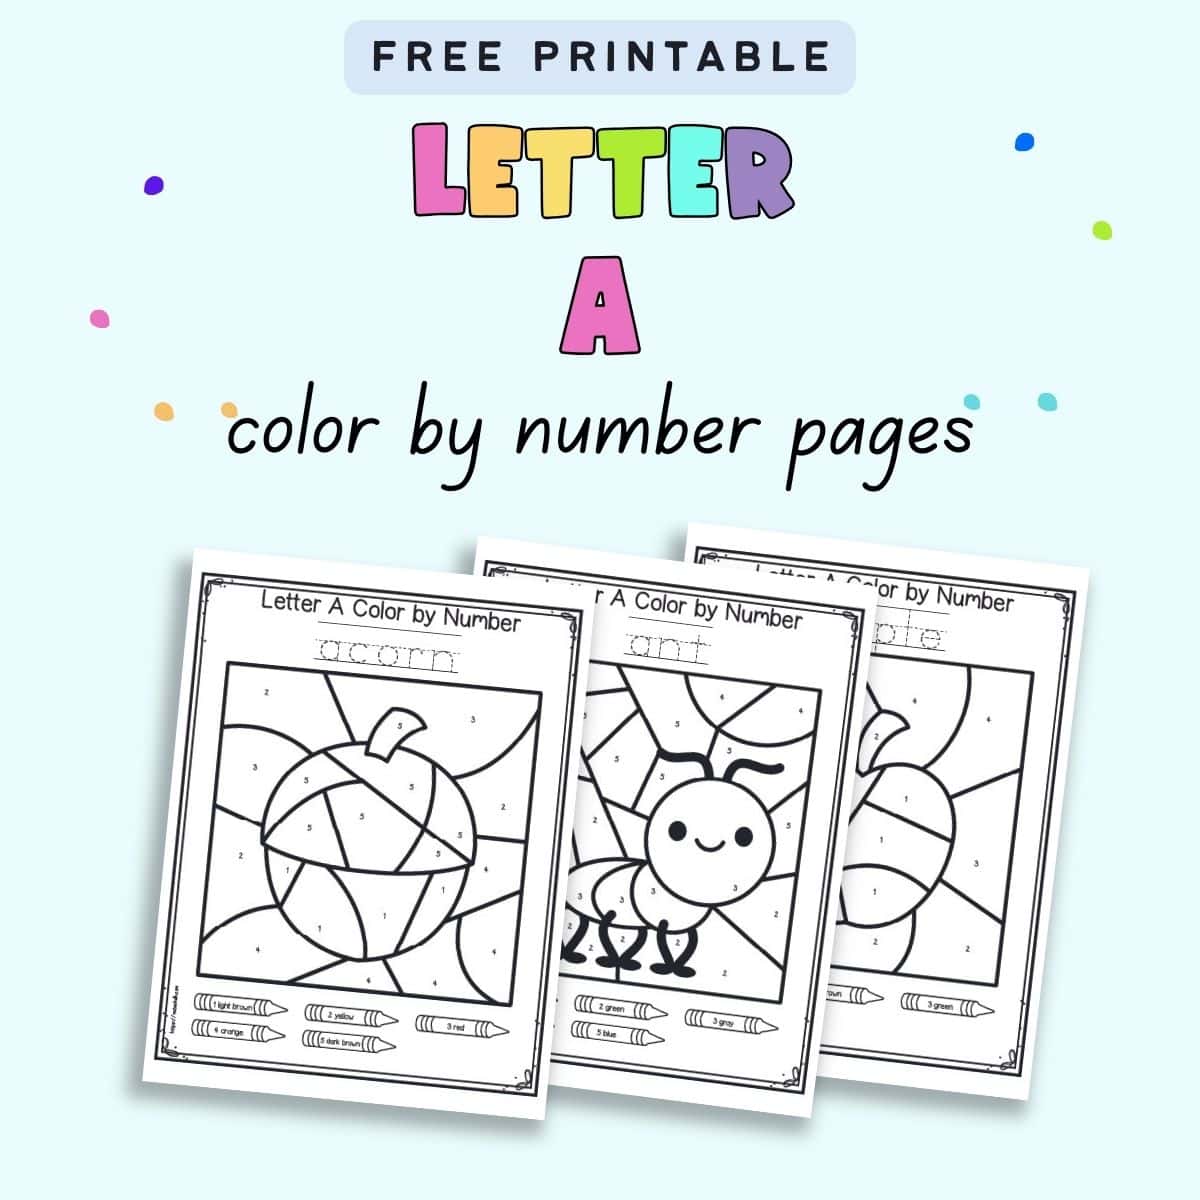 Text "free printable letter a color by number pages" with a. preview of three color by number pages with numbers 1-5